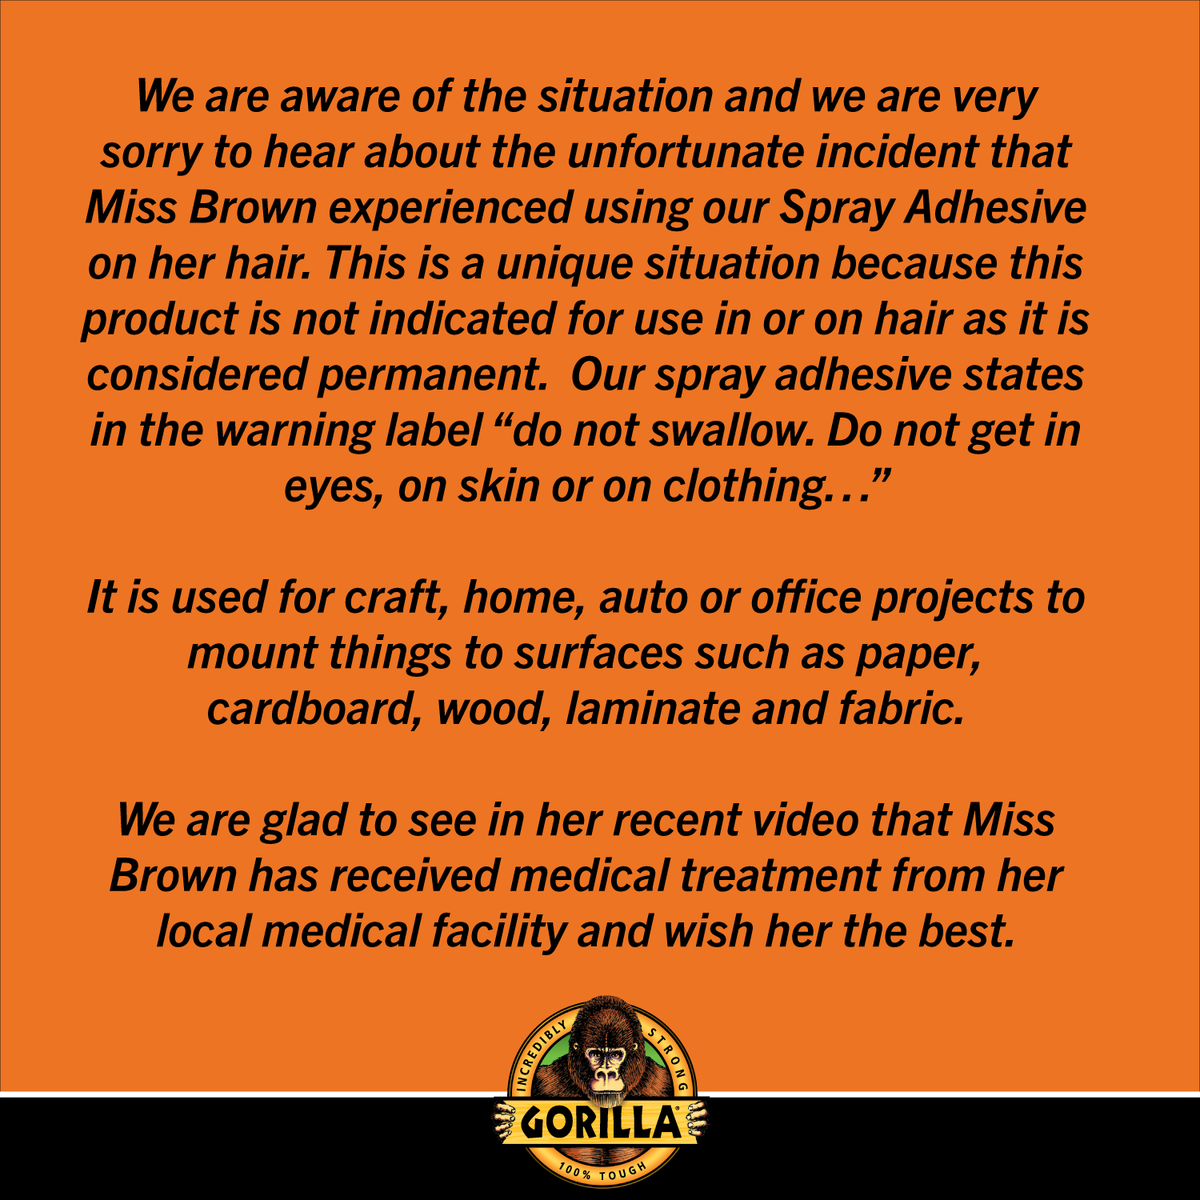 We are very sorry to hear about the unfortunate incident that Miss Brown experienced using our Spray Adhesive on her hair.  We are glad to see in her recent video that Miss Brown has received medical treatment from her local medical facility and wish her the best.